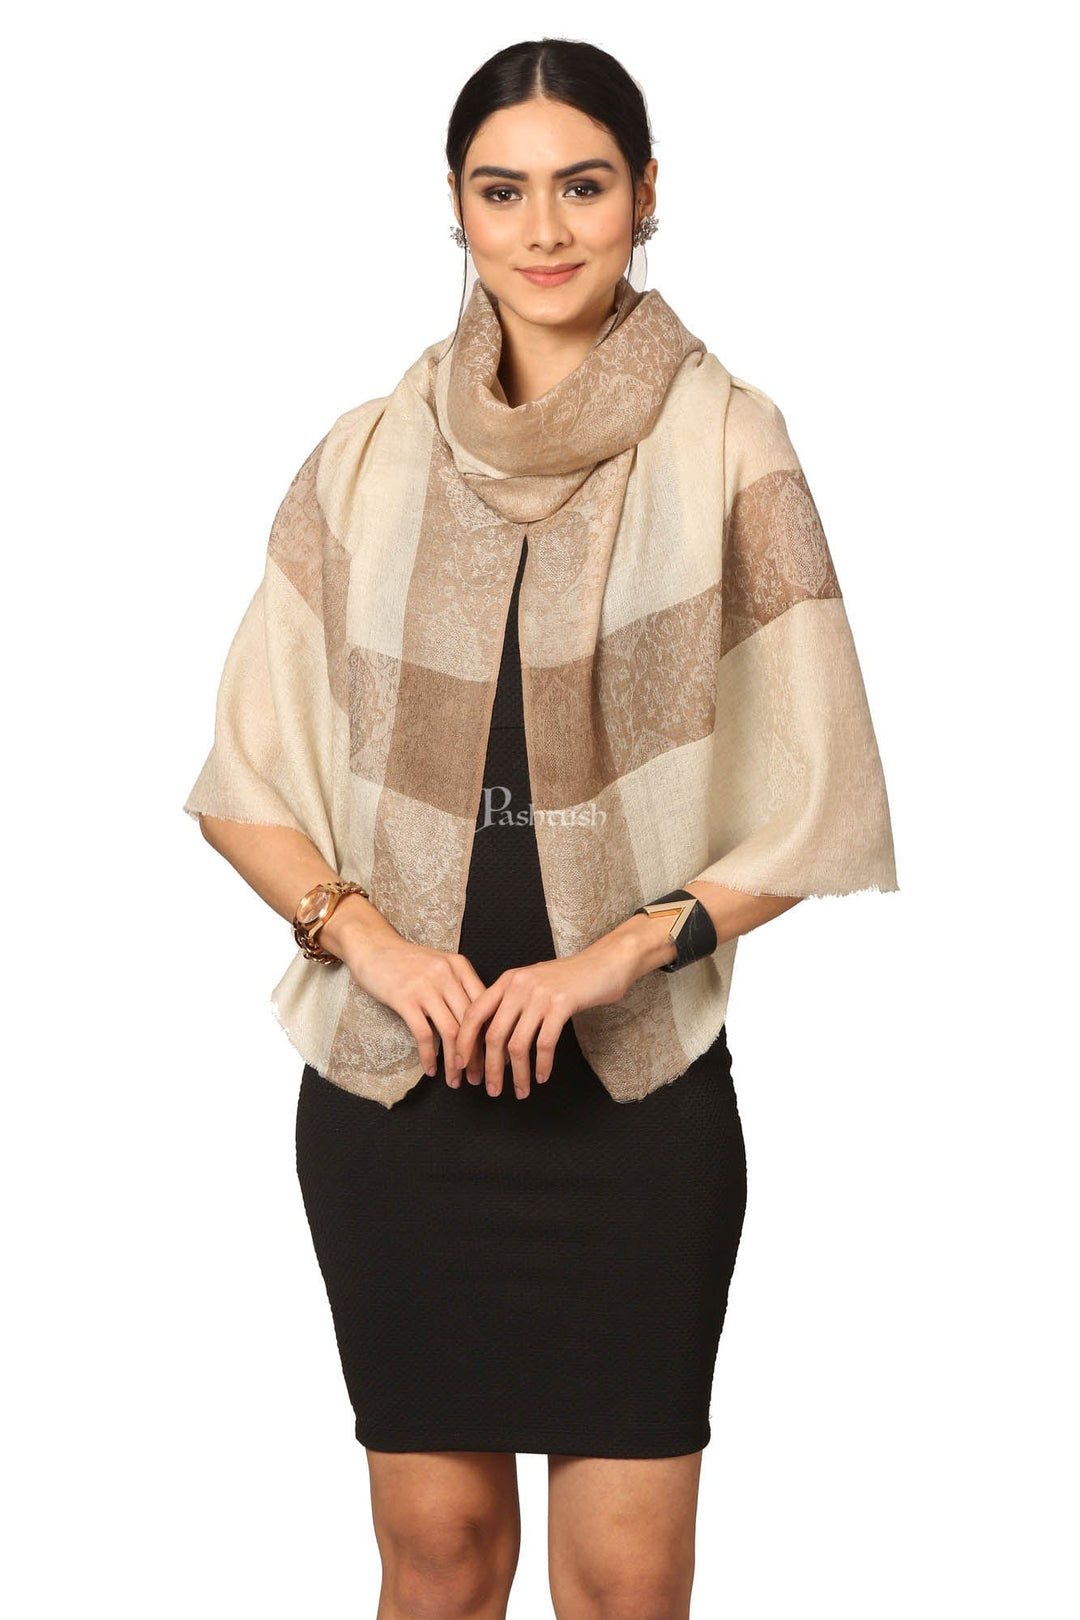 Pashtush India Womens Stoles and Scarves Scarf Pashtush Fine Wool Luxury Striped Design Scarf, Stole, Weaving Design - Beige